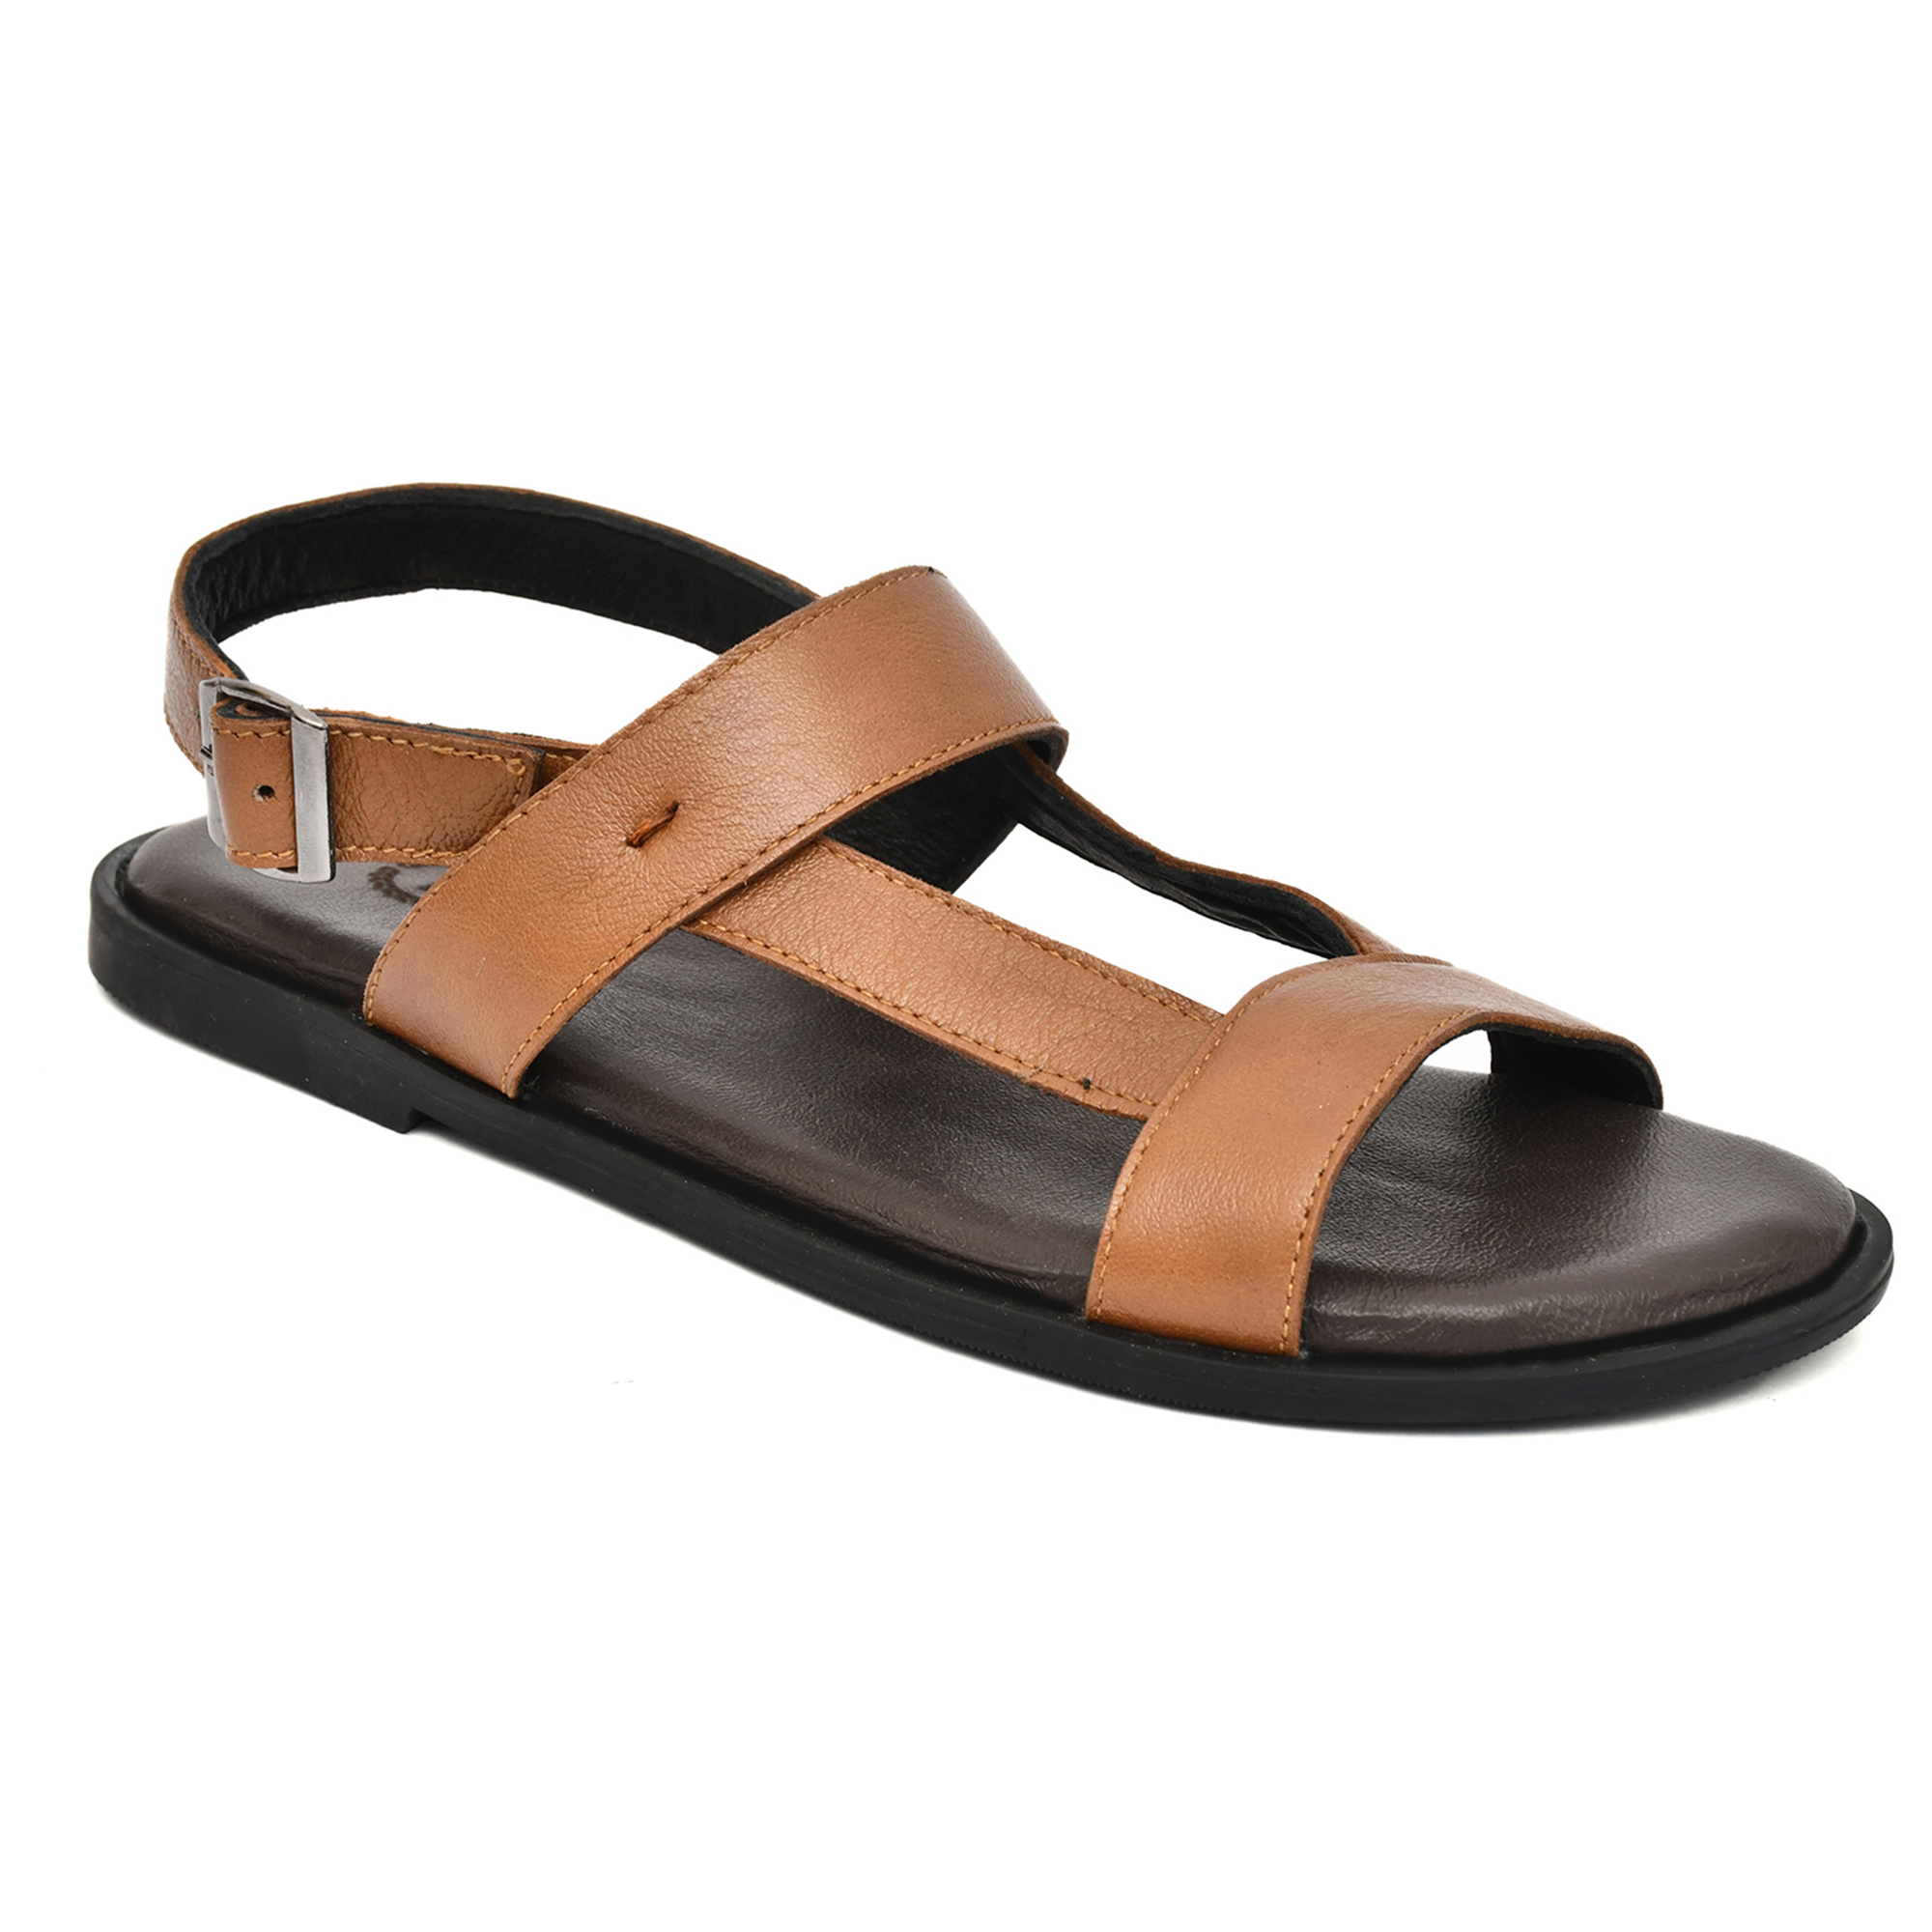 Tan Leather Sandals for Mens with Memory foam footpad by asm. Article : SAN02-GTan Size : UK 5-12